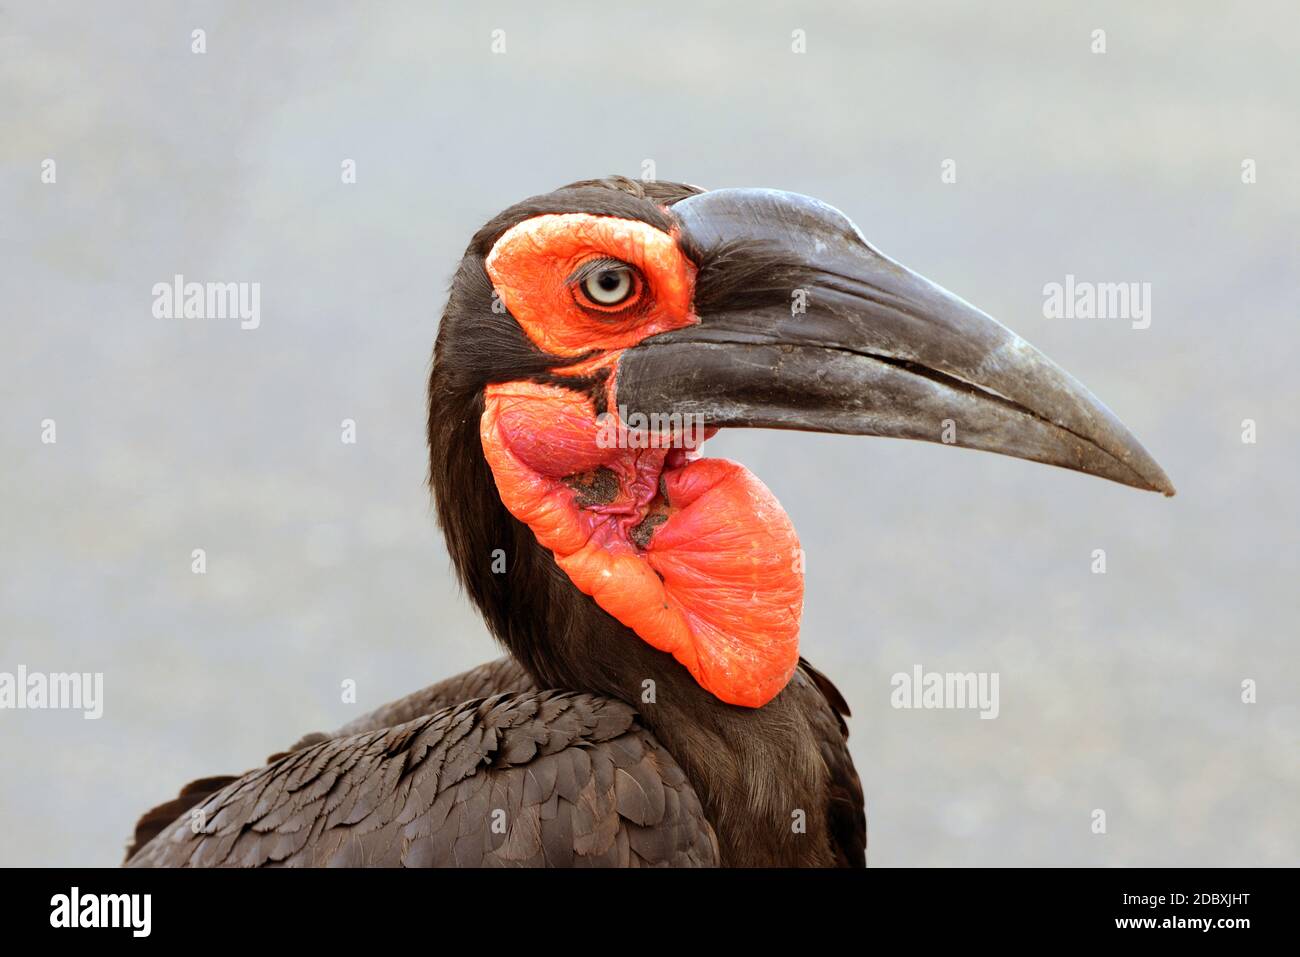 Red-cheeked ground hornbill in the Kruger National Park in South Africa Stock Photo